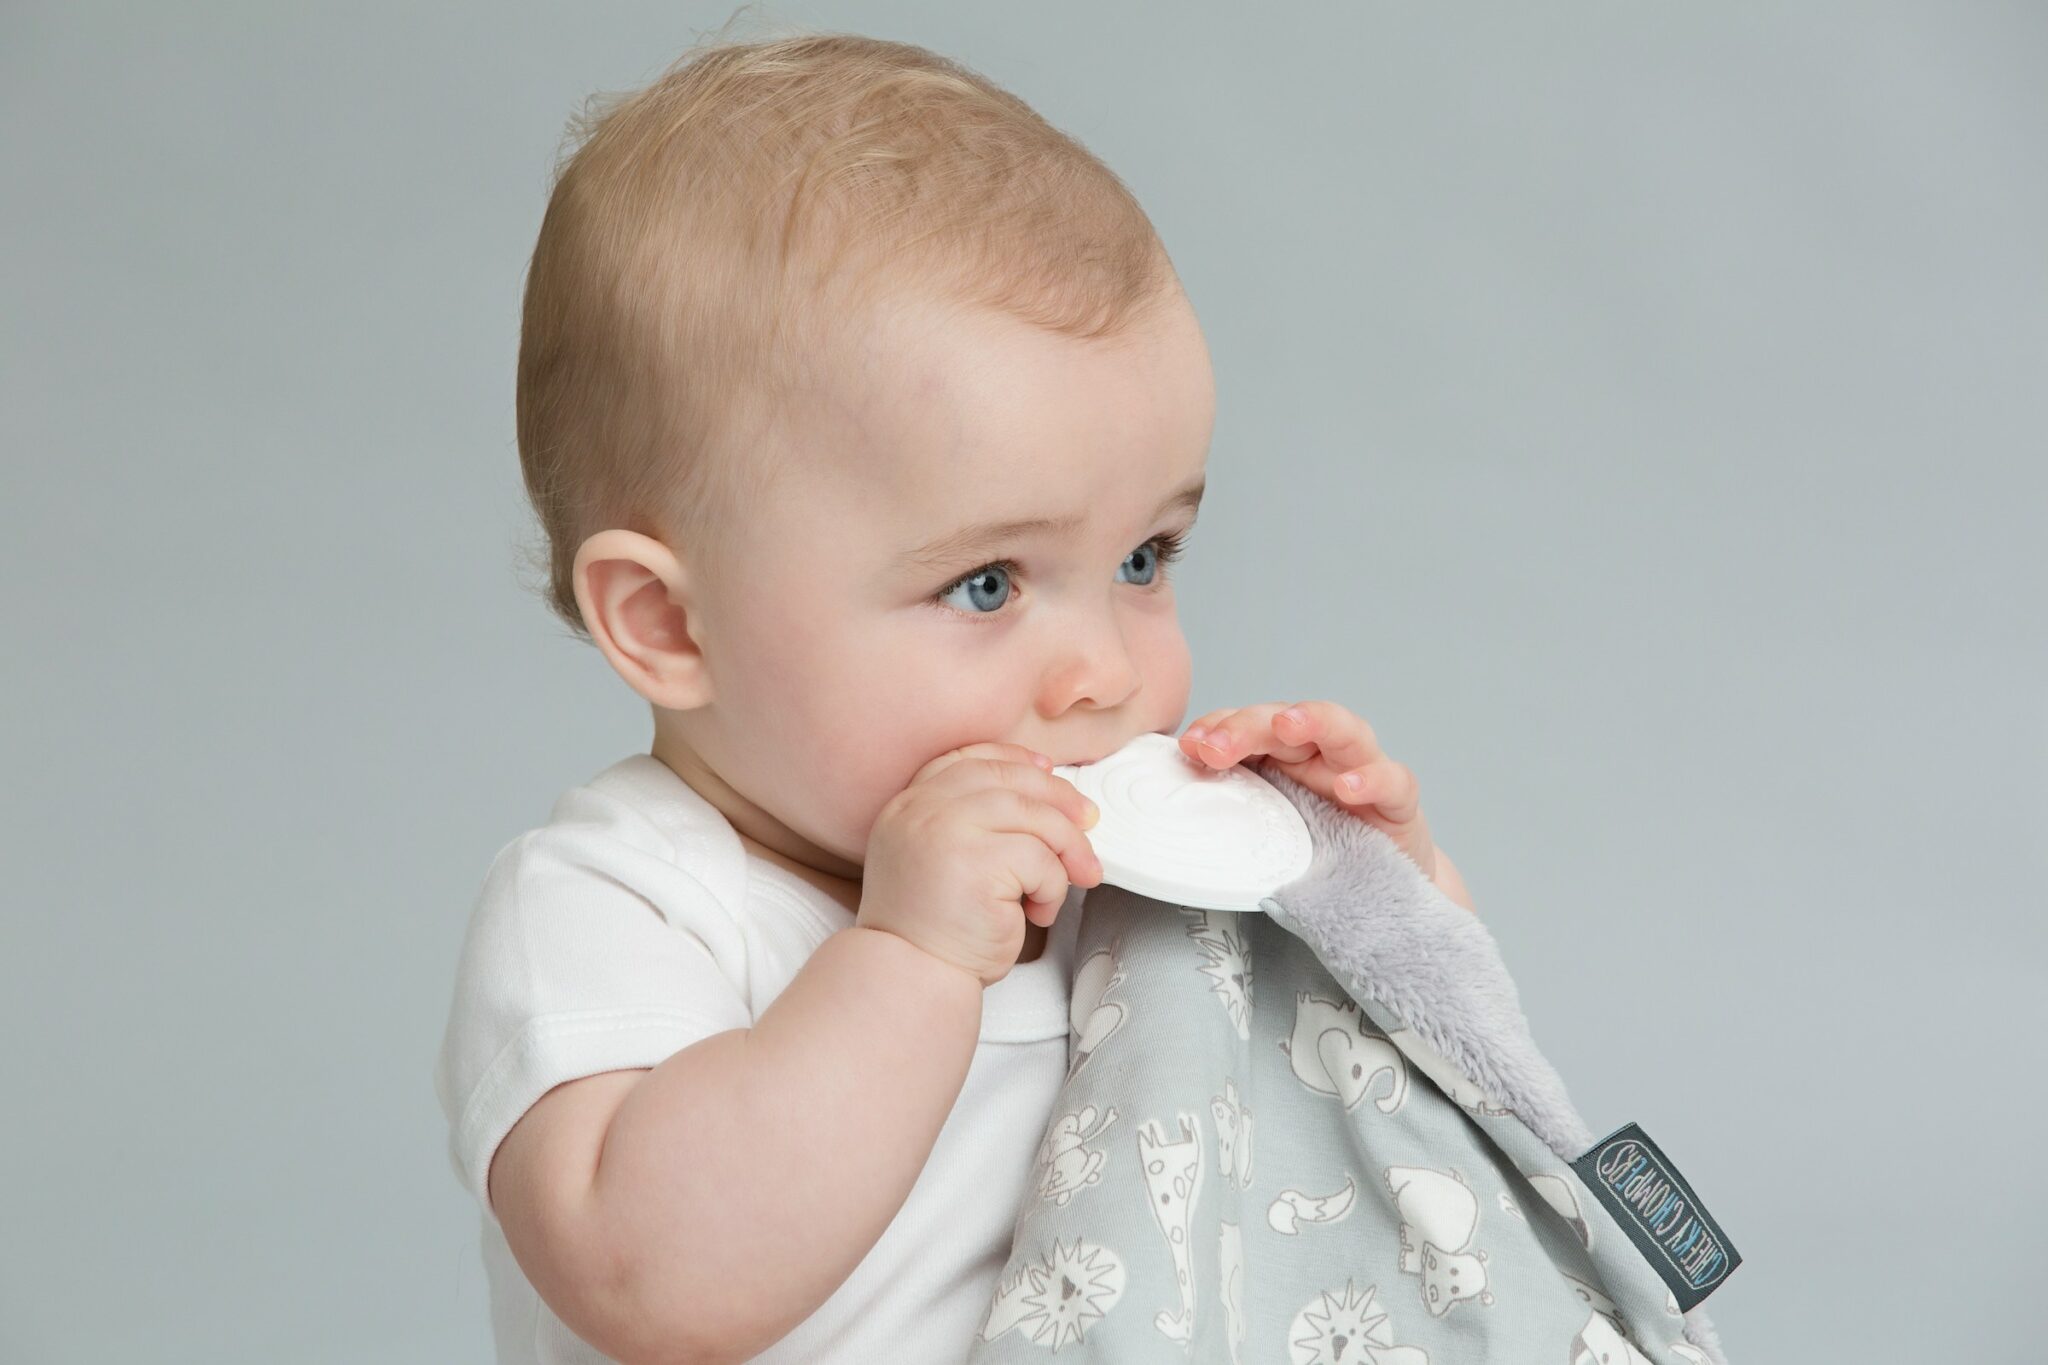 Are teething toys safe?